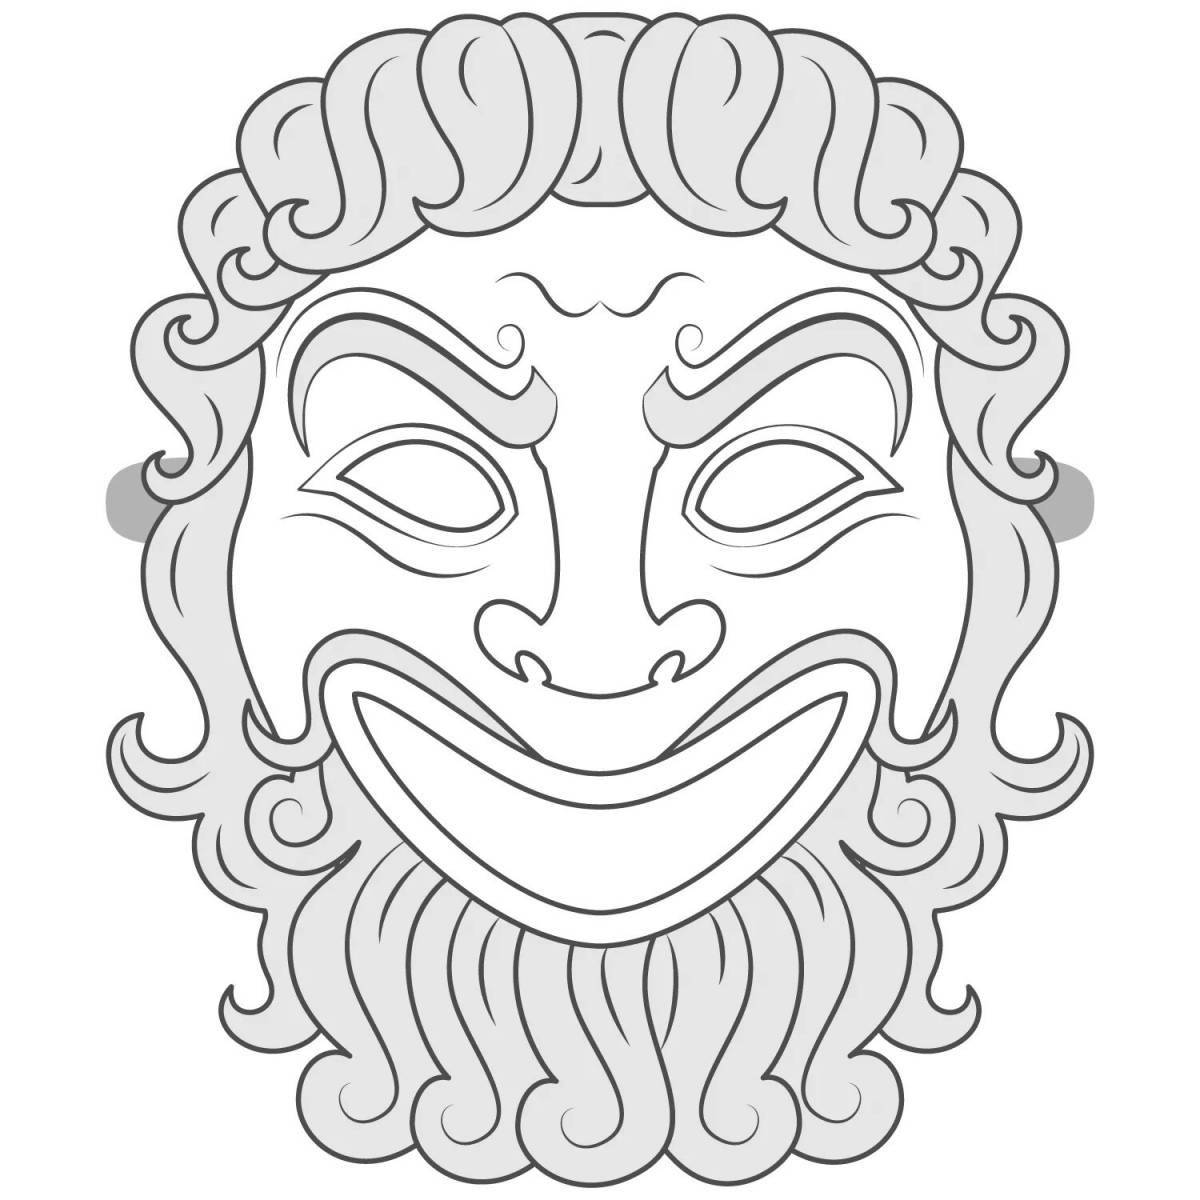 Glowing fabric mask coloring page